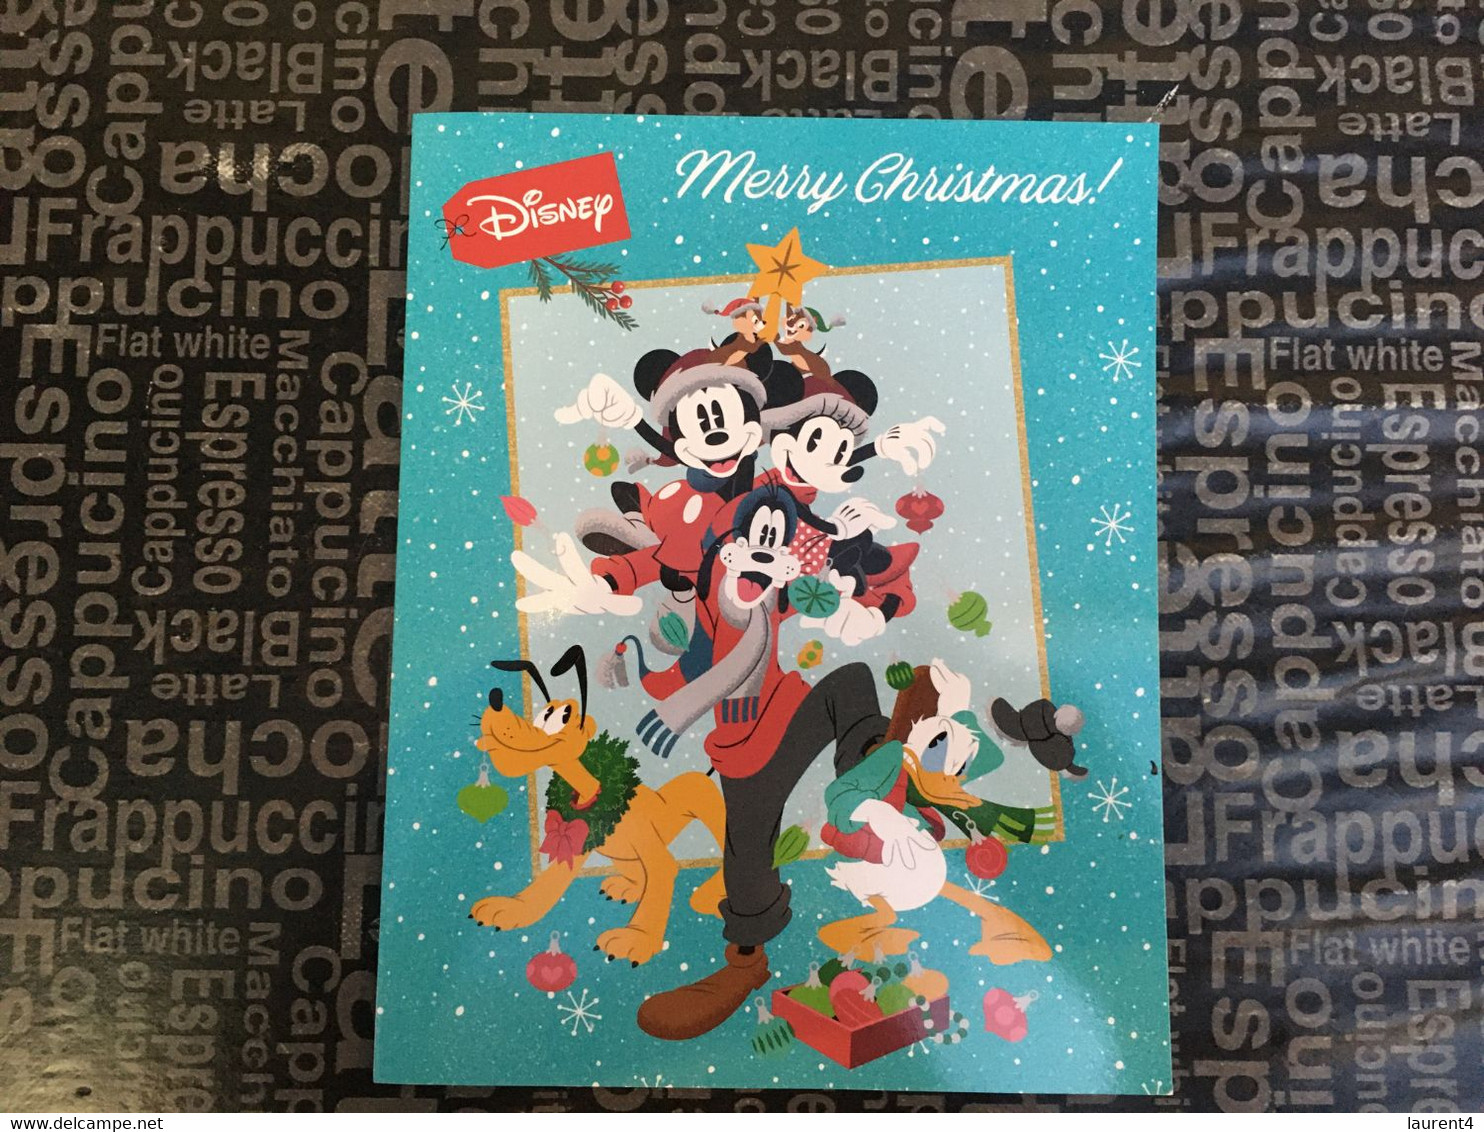 11-11-2021 - Australia - Merry Christmas 2021 - With 1 Mickey Mouse Cover - Cancelled In Red 1 November 2021 - Presentation Packs